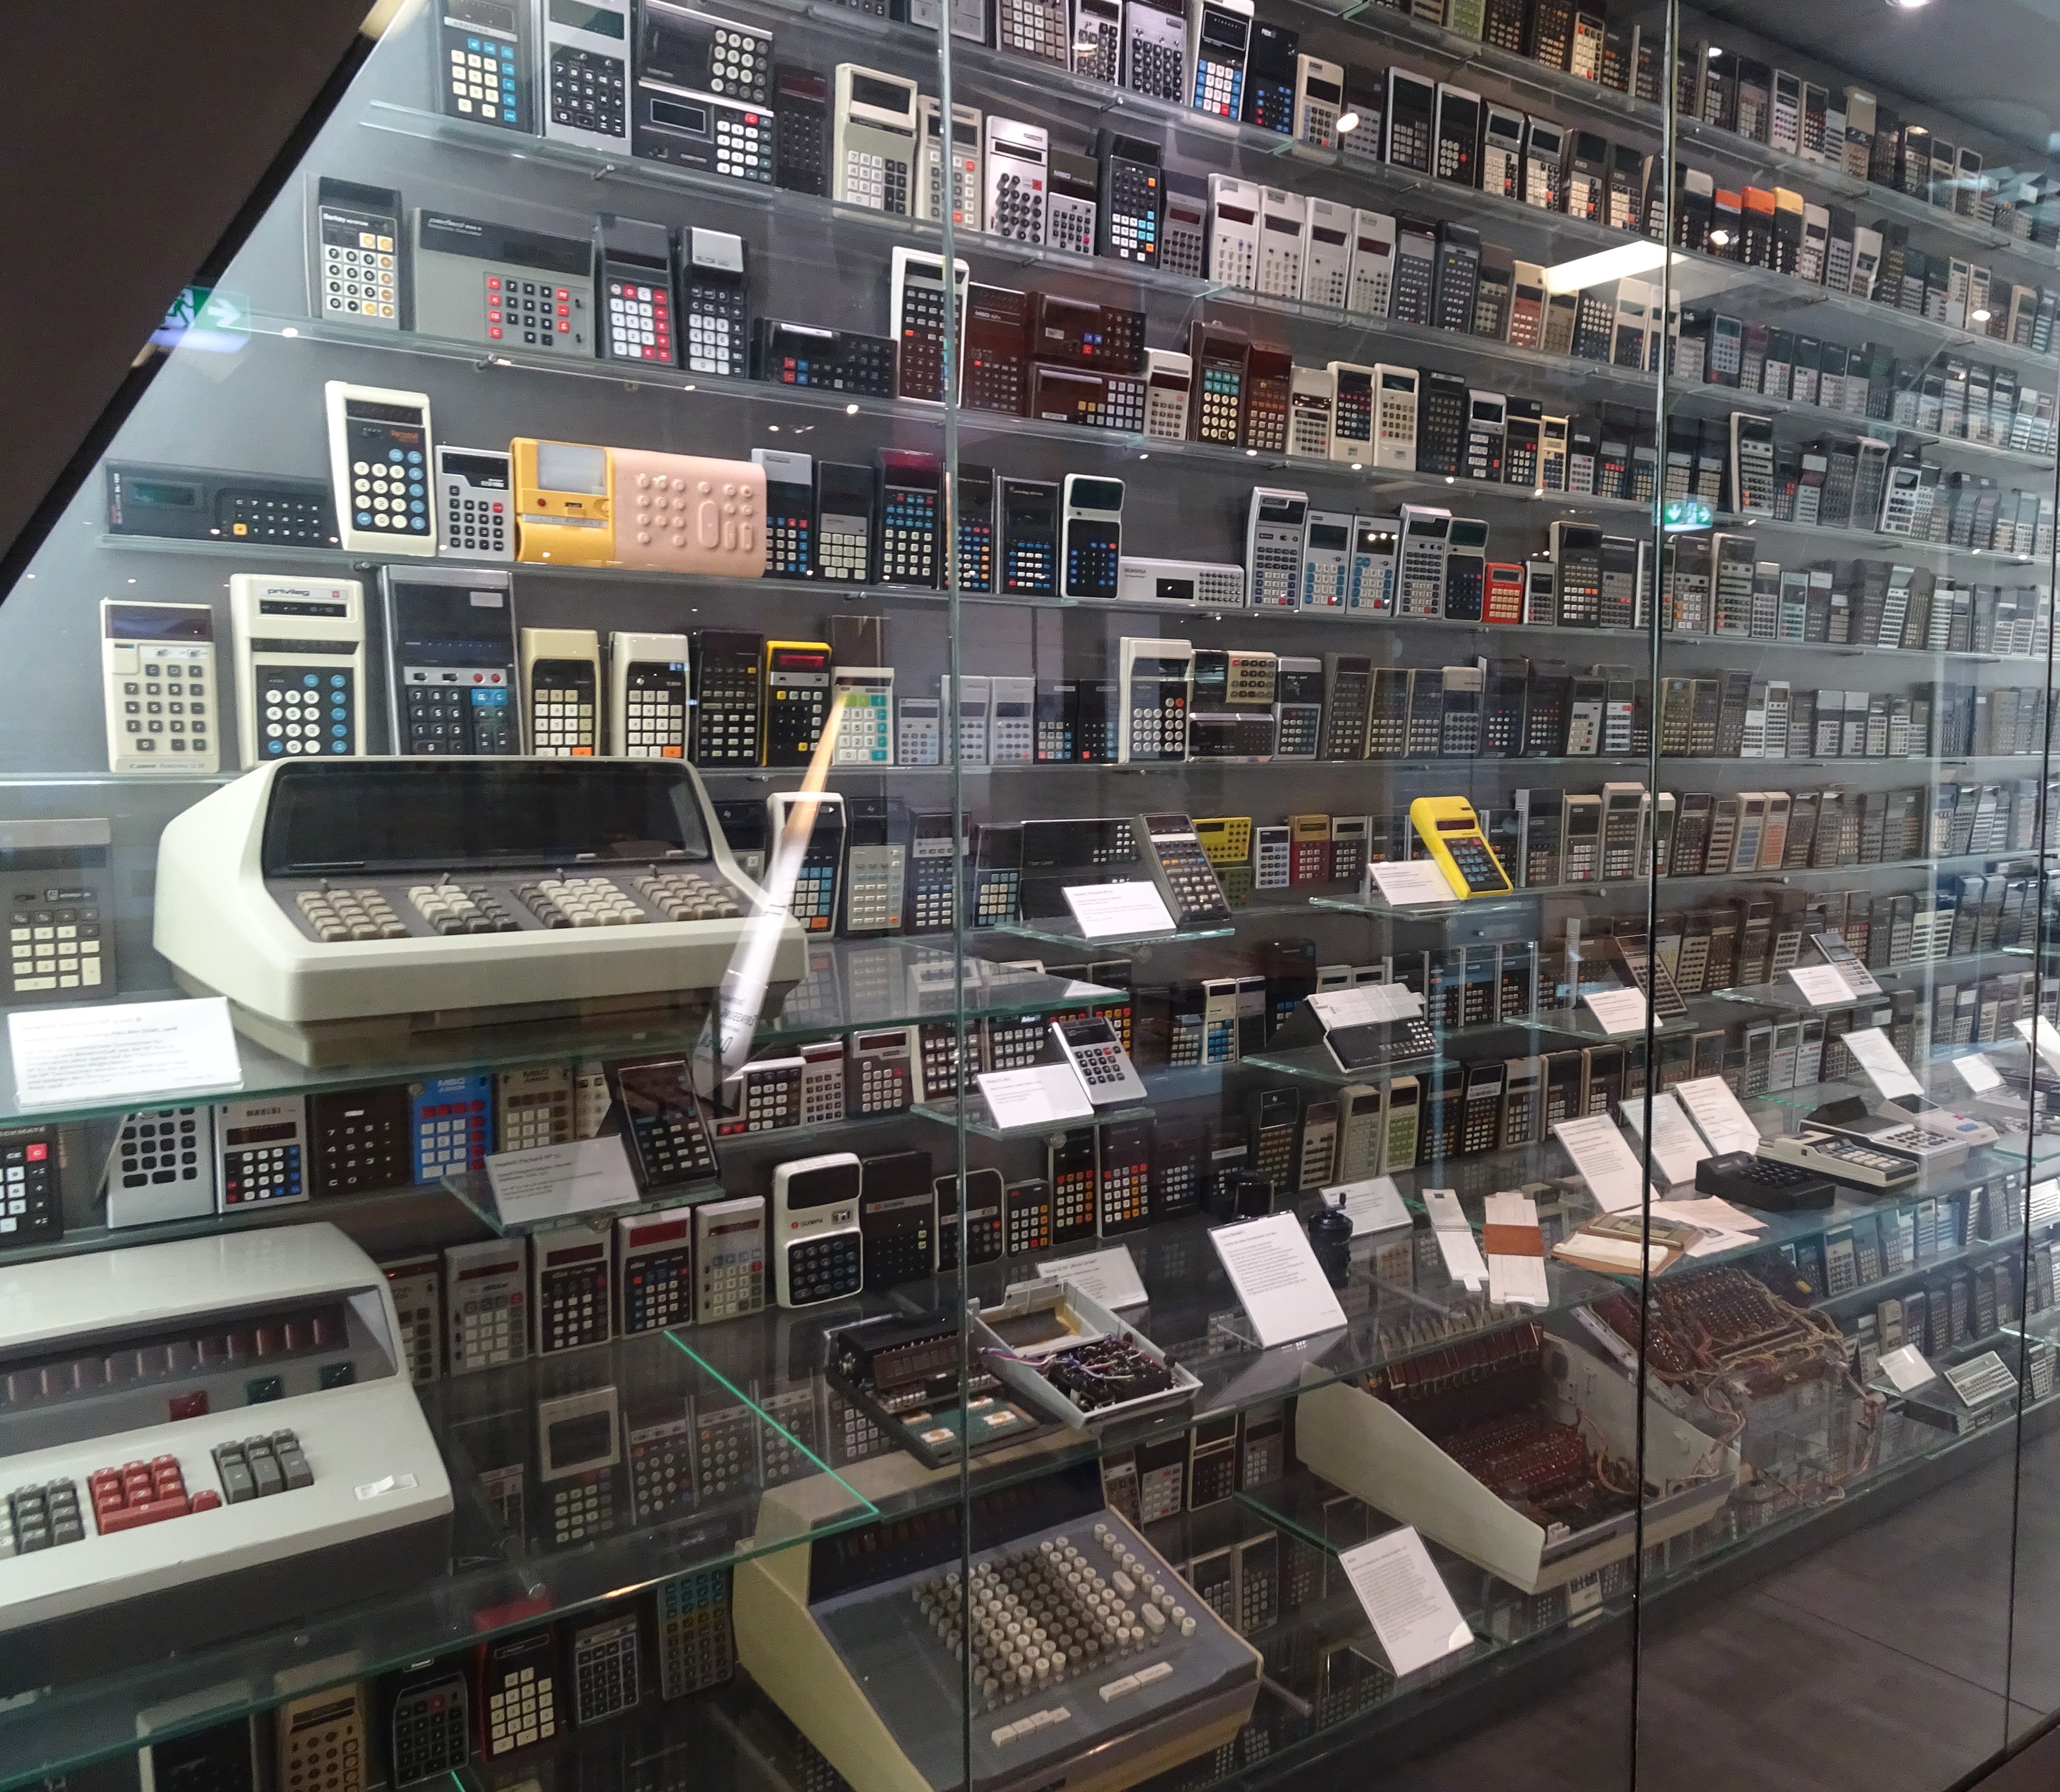 A glass display case with hundreds of electronic calculators inside